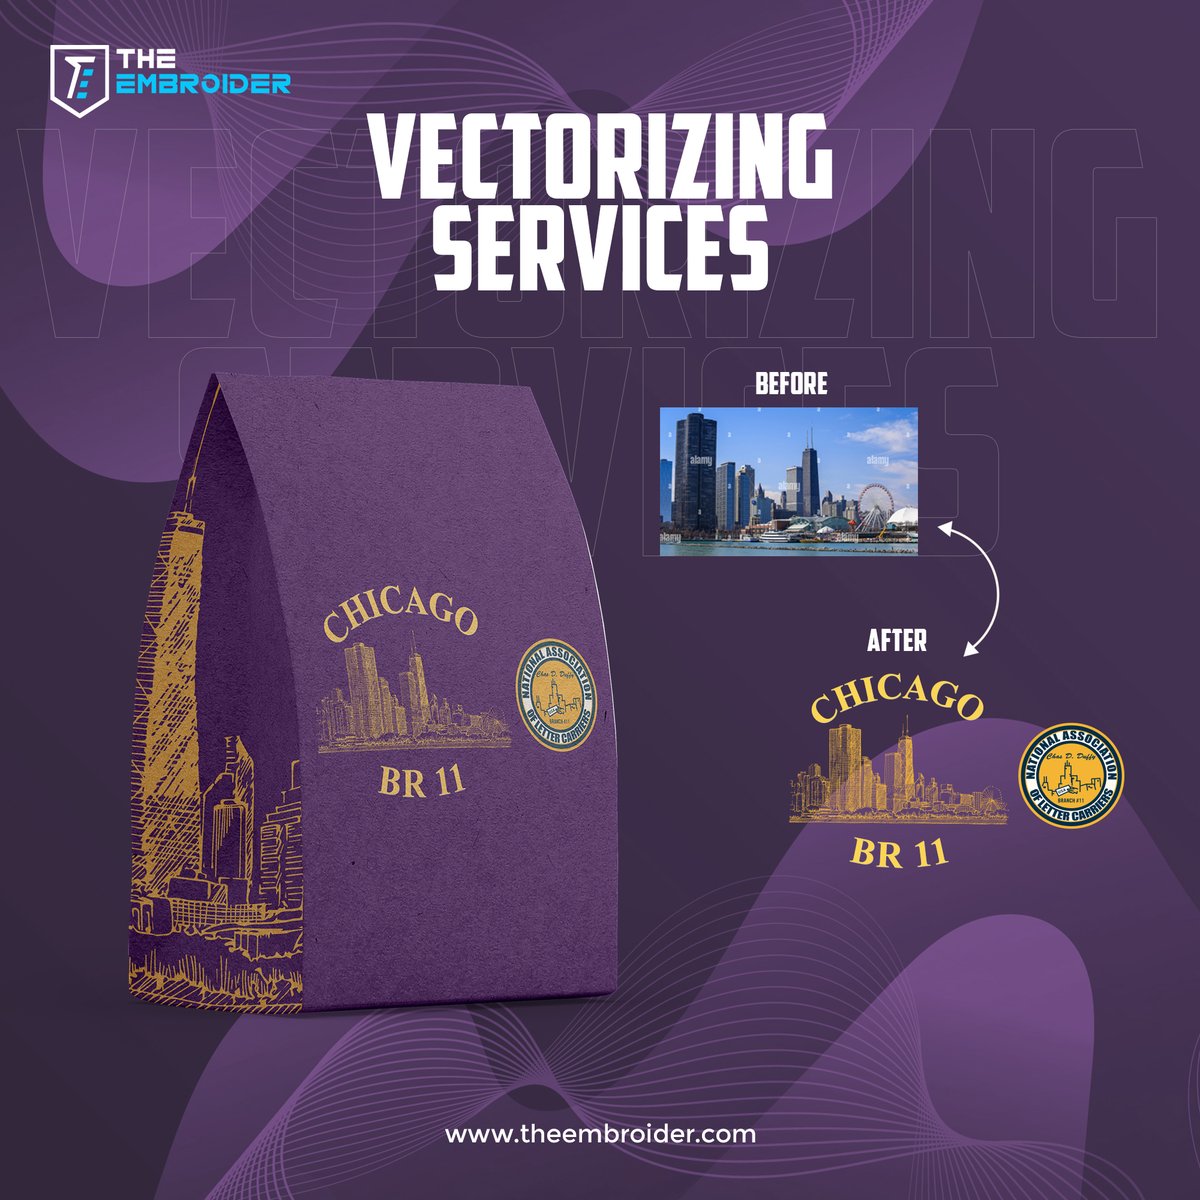 Witness the seamless enhancement of brand identity in our recent project, how our vectorizing services have enhanced the logo of  Chicago BR 11.
theembroider.com
Contact: +1 972-853-8681
#theembroider #vectorizedlogo #digitalwork #digitalizedlogo #logodesigns #embroidery